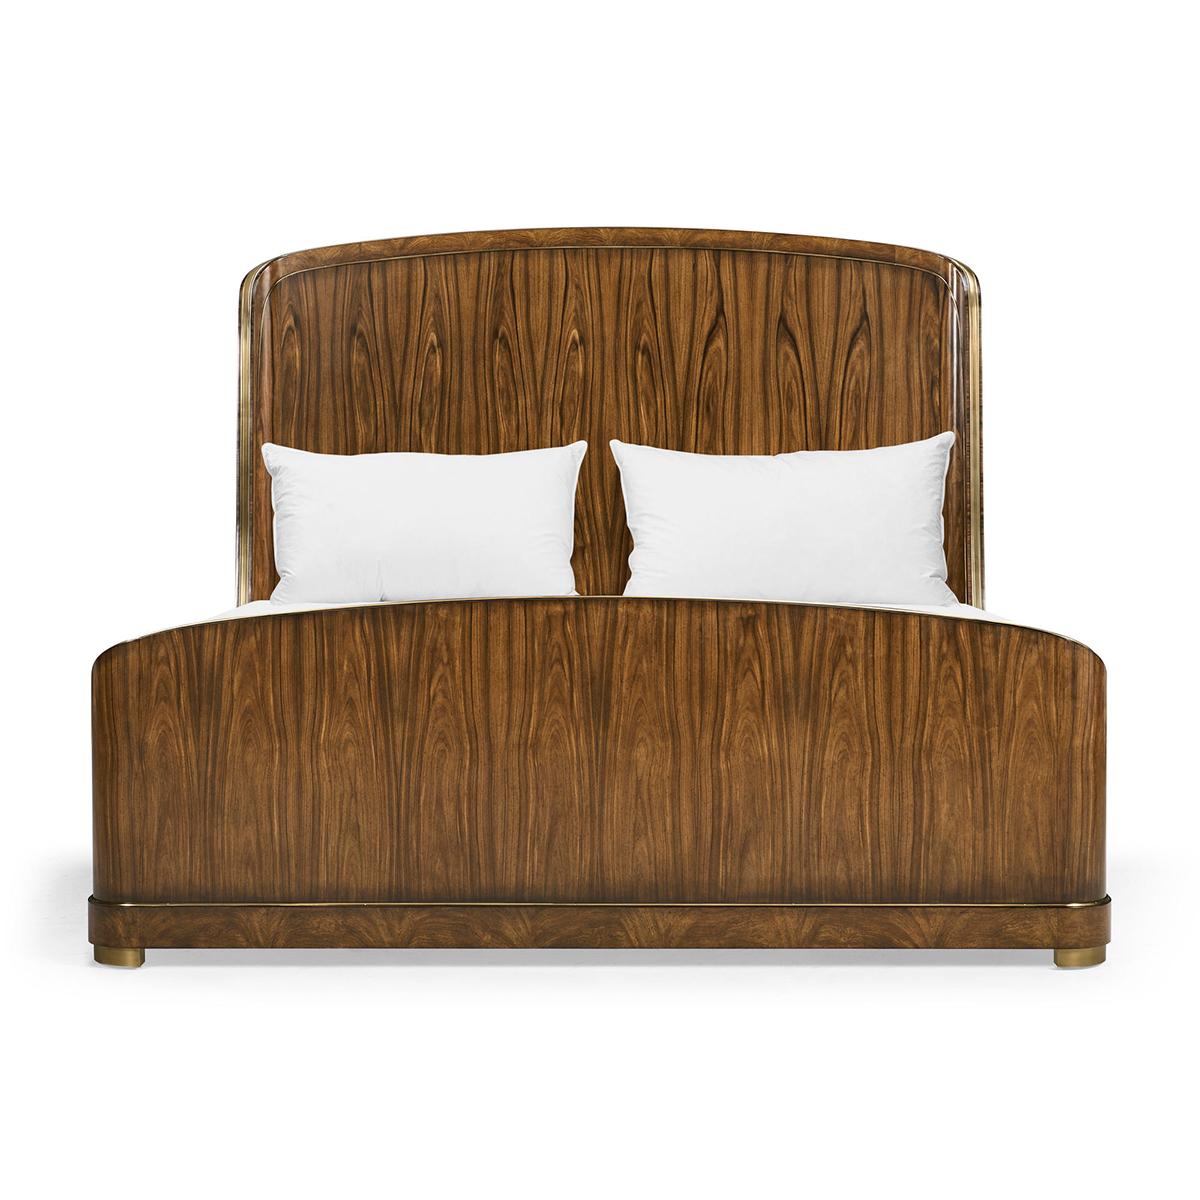 Each element of this bed is meticulously designed to offer both visual and tactile satisfaction. Crafted from the finest mahogany and exotic woods, it features a stunning finish in rich Santos Brown complemented by Antique Brass accents.

The bed's